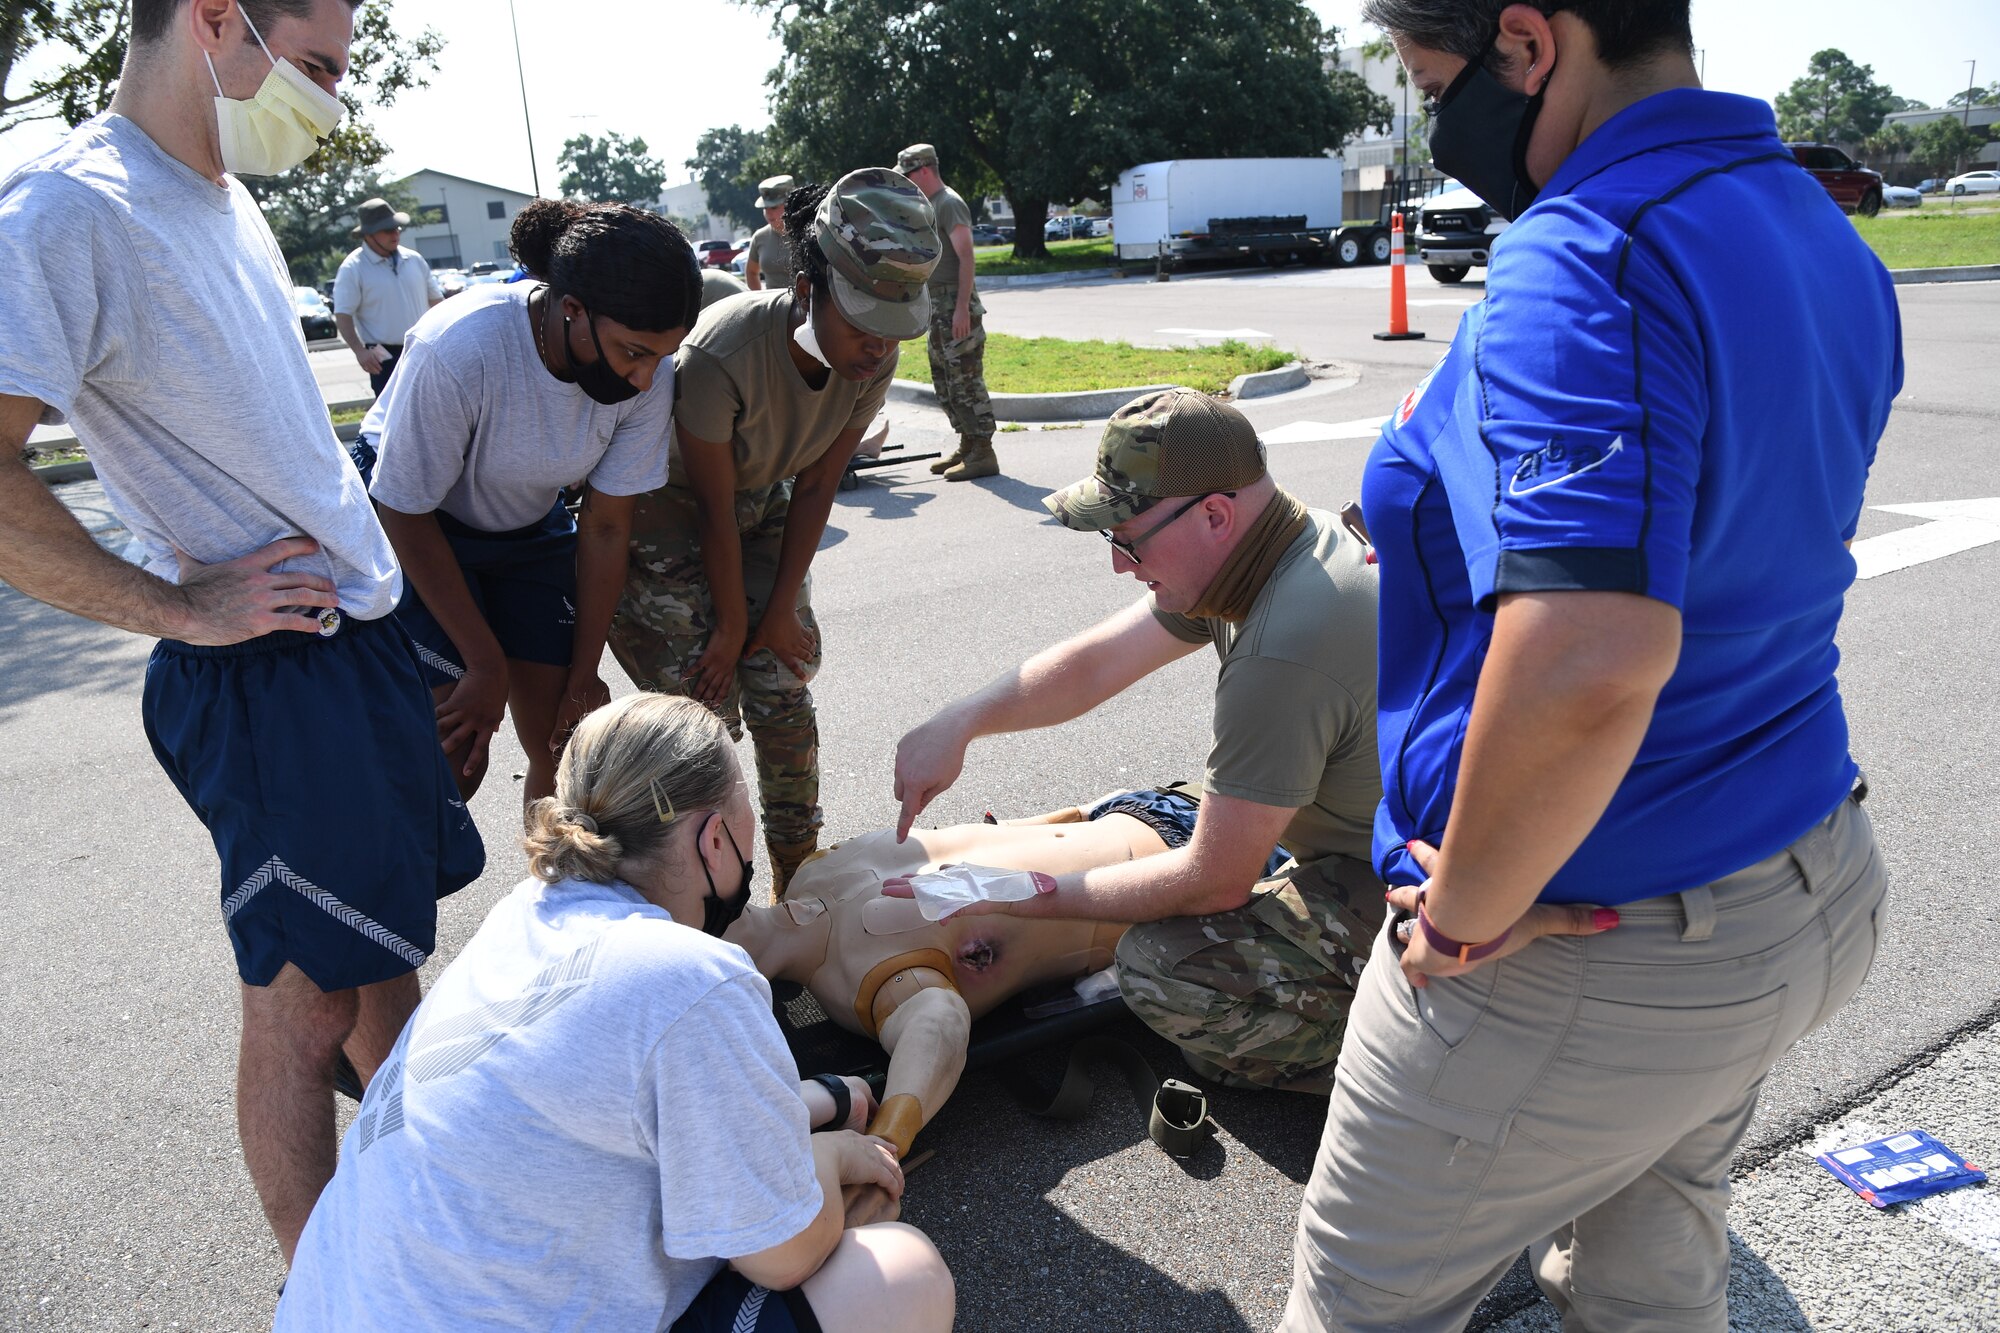 U.S. Air Force Staff Sgt. Timothy Parde, 81st Medical Support Squadron emergency medical services site coordinator, provides a triage procedure demonstration during a Tactical Combat Casualty Care Rodeo at Keesler Air Force Base, Mississippi, August 5, 2021. The rodeo, a Ready Eagle Training component, provides practical hands-on critical medical trauma skills training for 81st Medical Group personnel. (U.S. Air Force photo by Kemberly Groue)